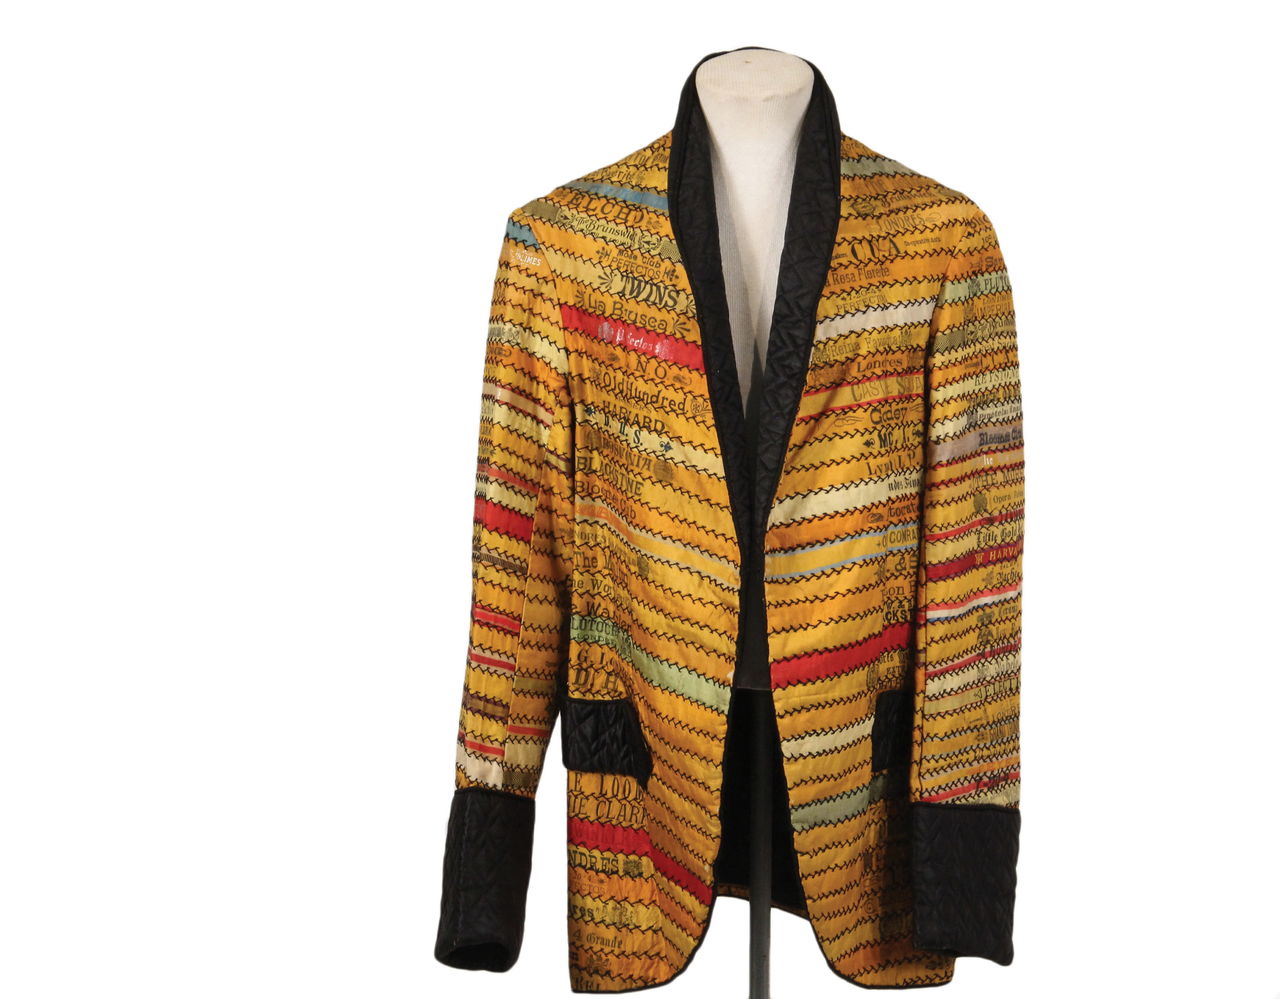 This unique c. 1880s smoking jacket made from silk cigar bands would fit a young boy. It sold at an auction in Thomaston, Maine for $1,755.